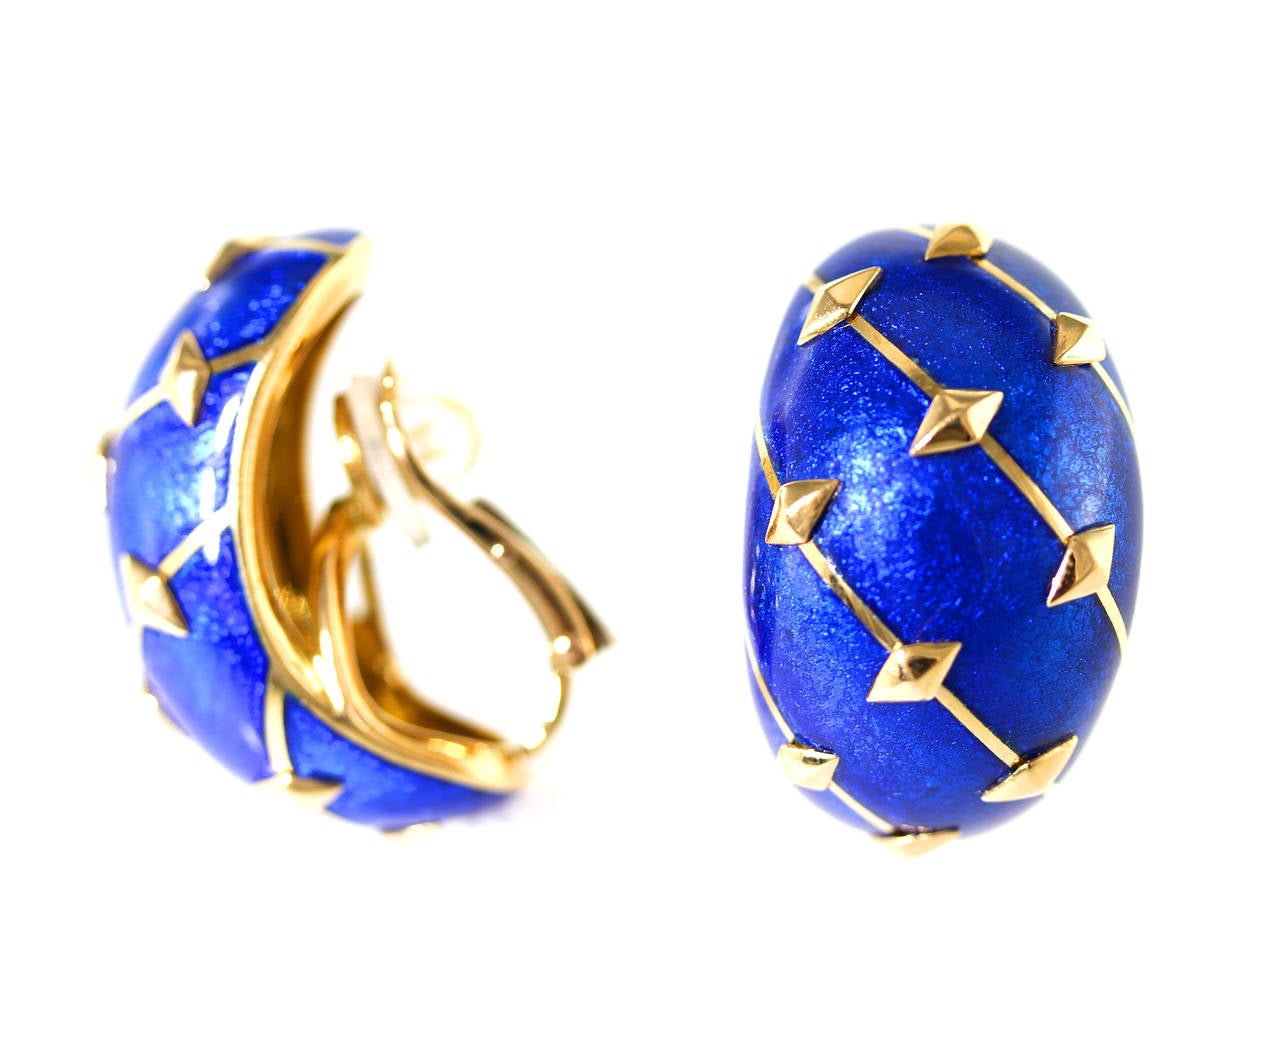 A pair of 18 karat yellow gold and blue Paillonne enamel earclips by Schlumberger for Tiffany & Co., designed as bombe half hoops applied with blue paillonne enamel accented by polished gold diagonal bands and diamond-shaped gold studs, gross weight